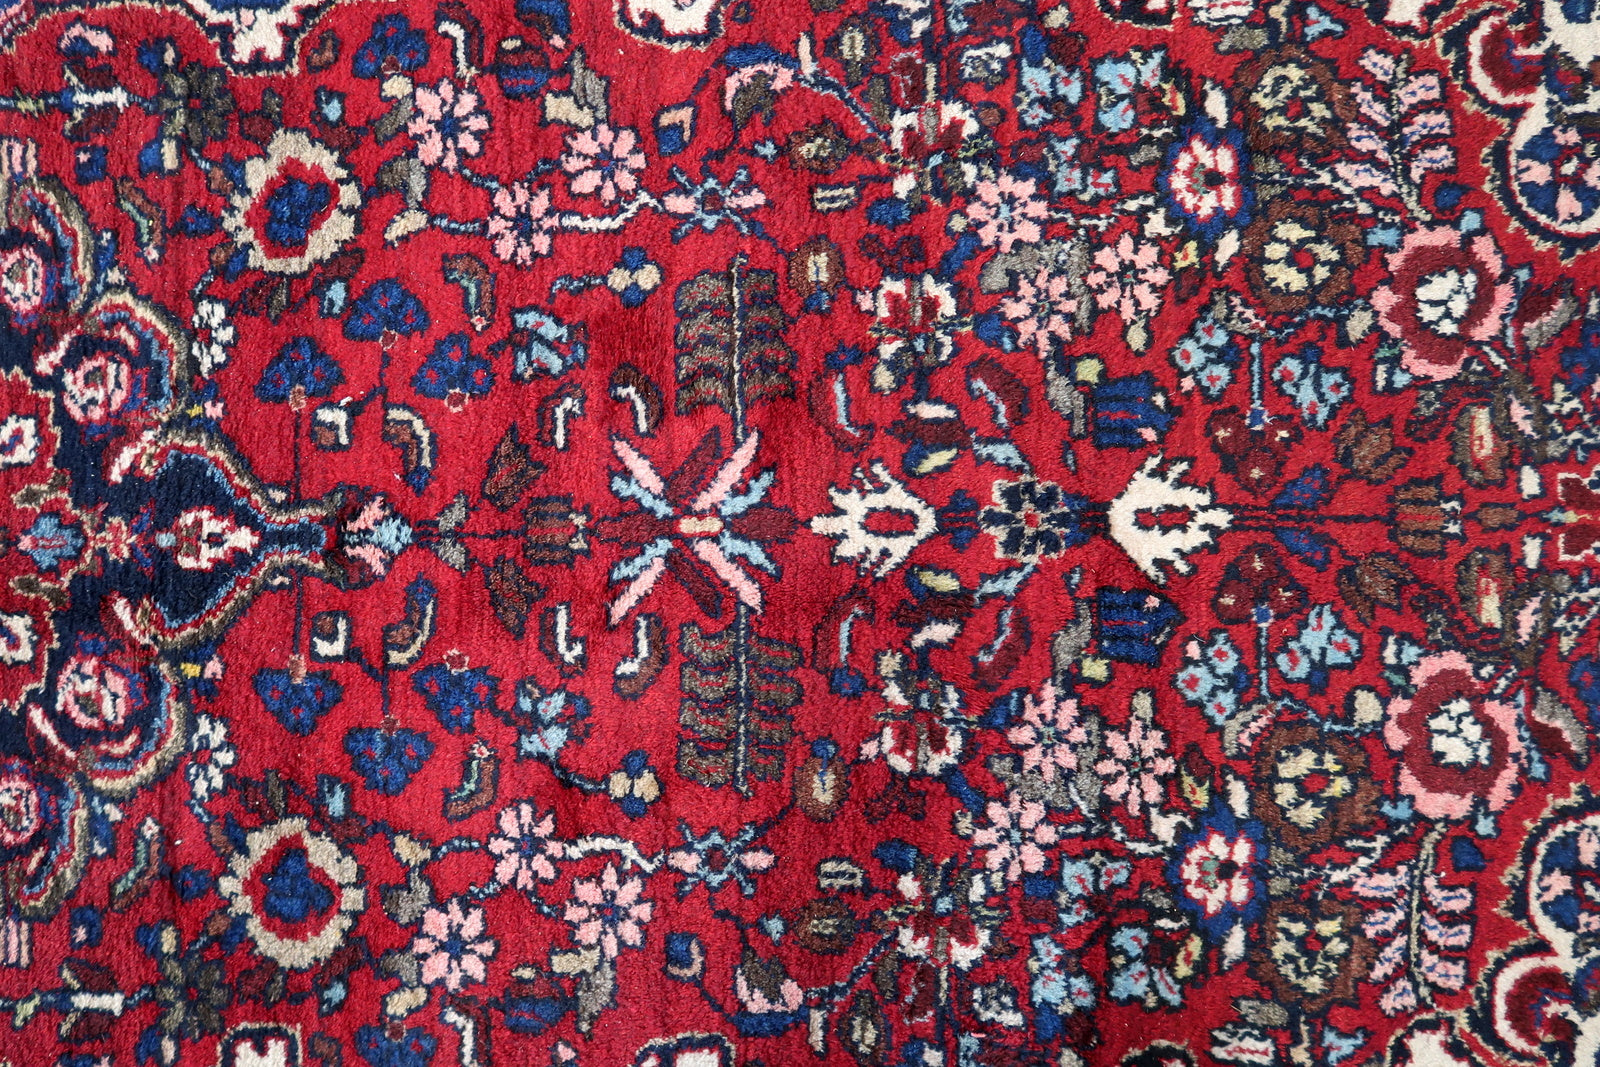 Close-up of symmetrical patterns on Handmade Vintage Persian Malayer Rug - Detailed view showcasing the symmetrical patterns.